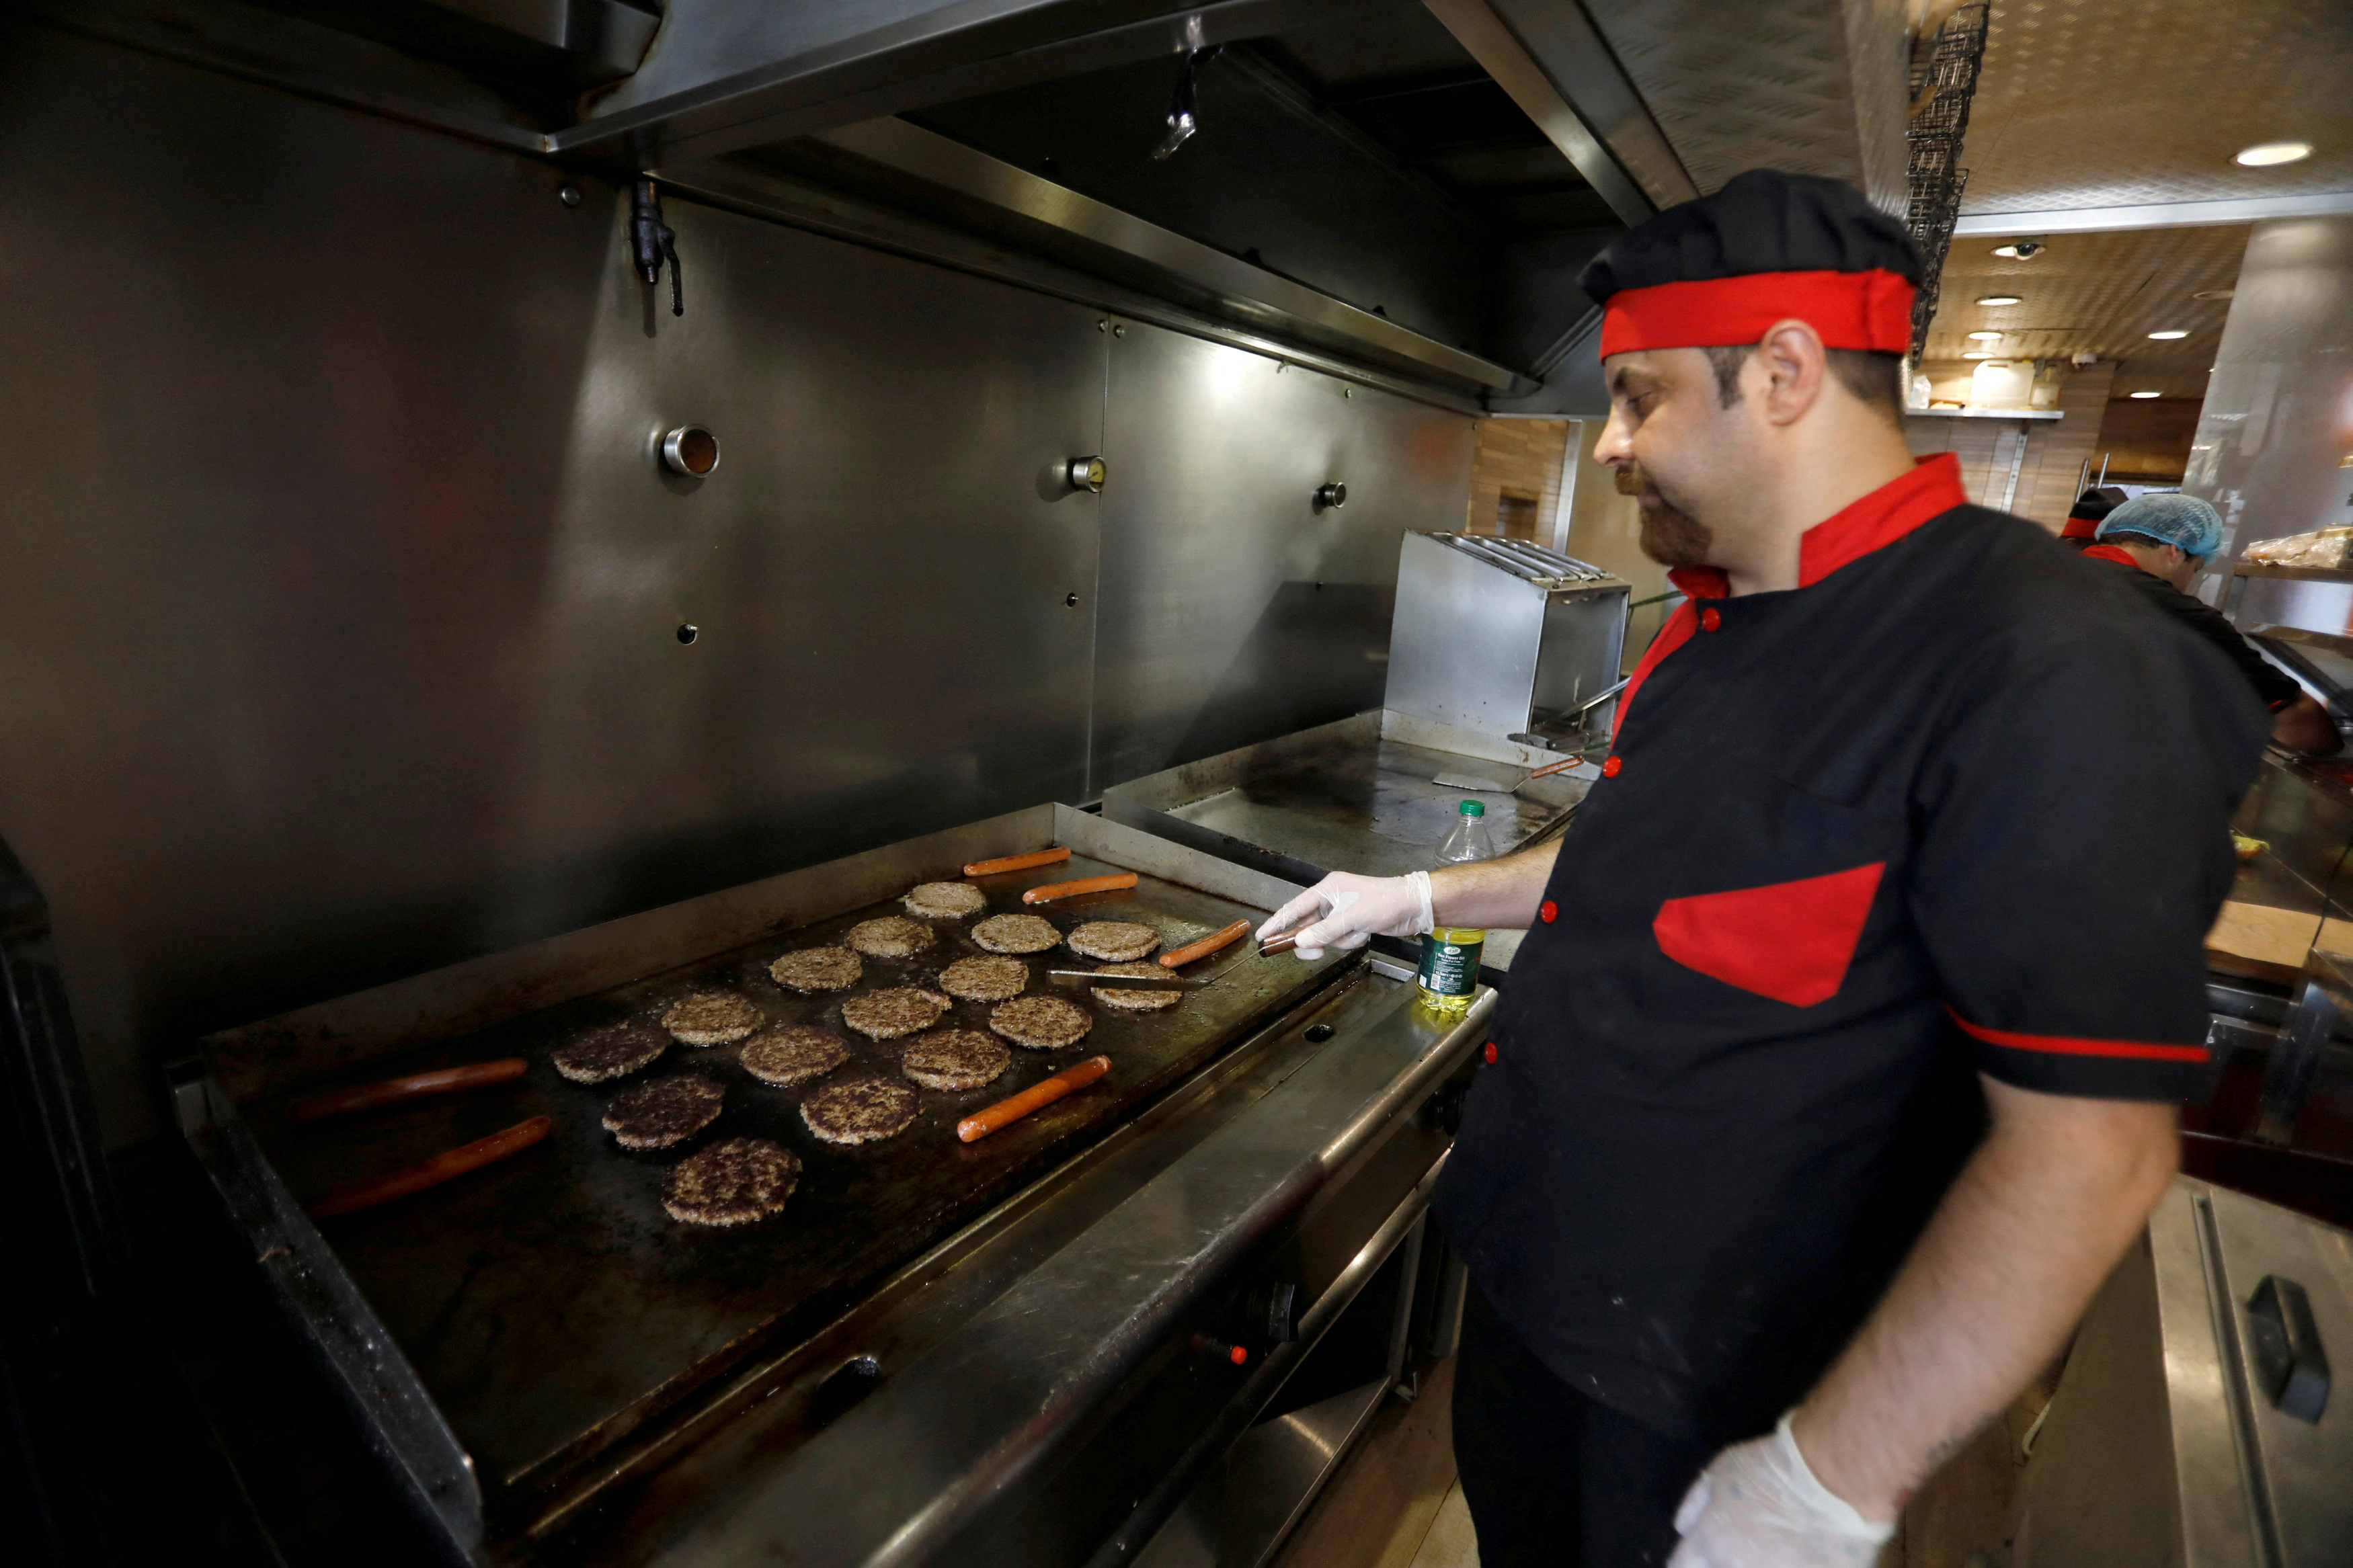 A man cooks burgers on the grill inside a restaurant in Baghdad